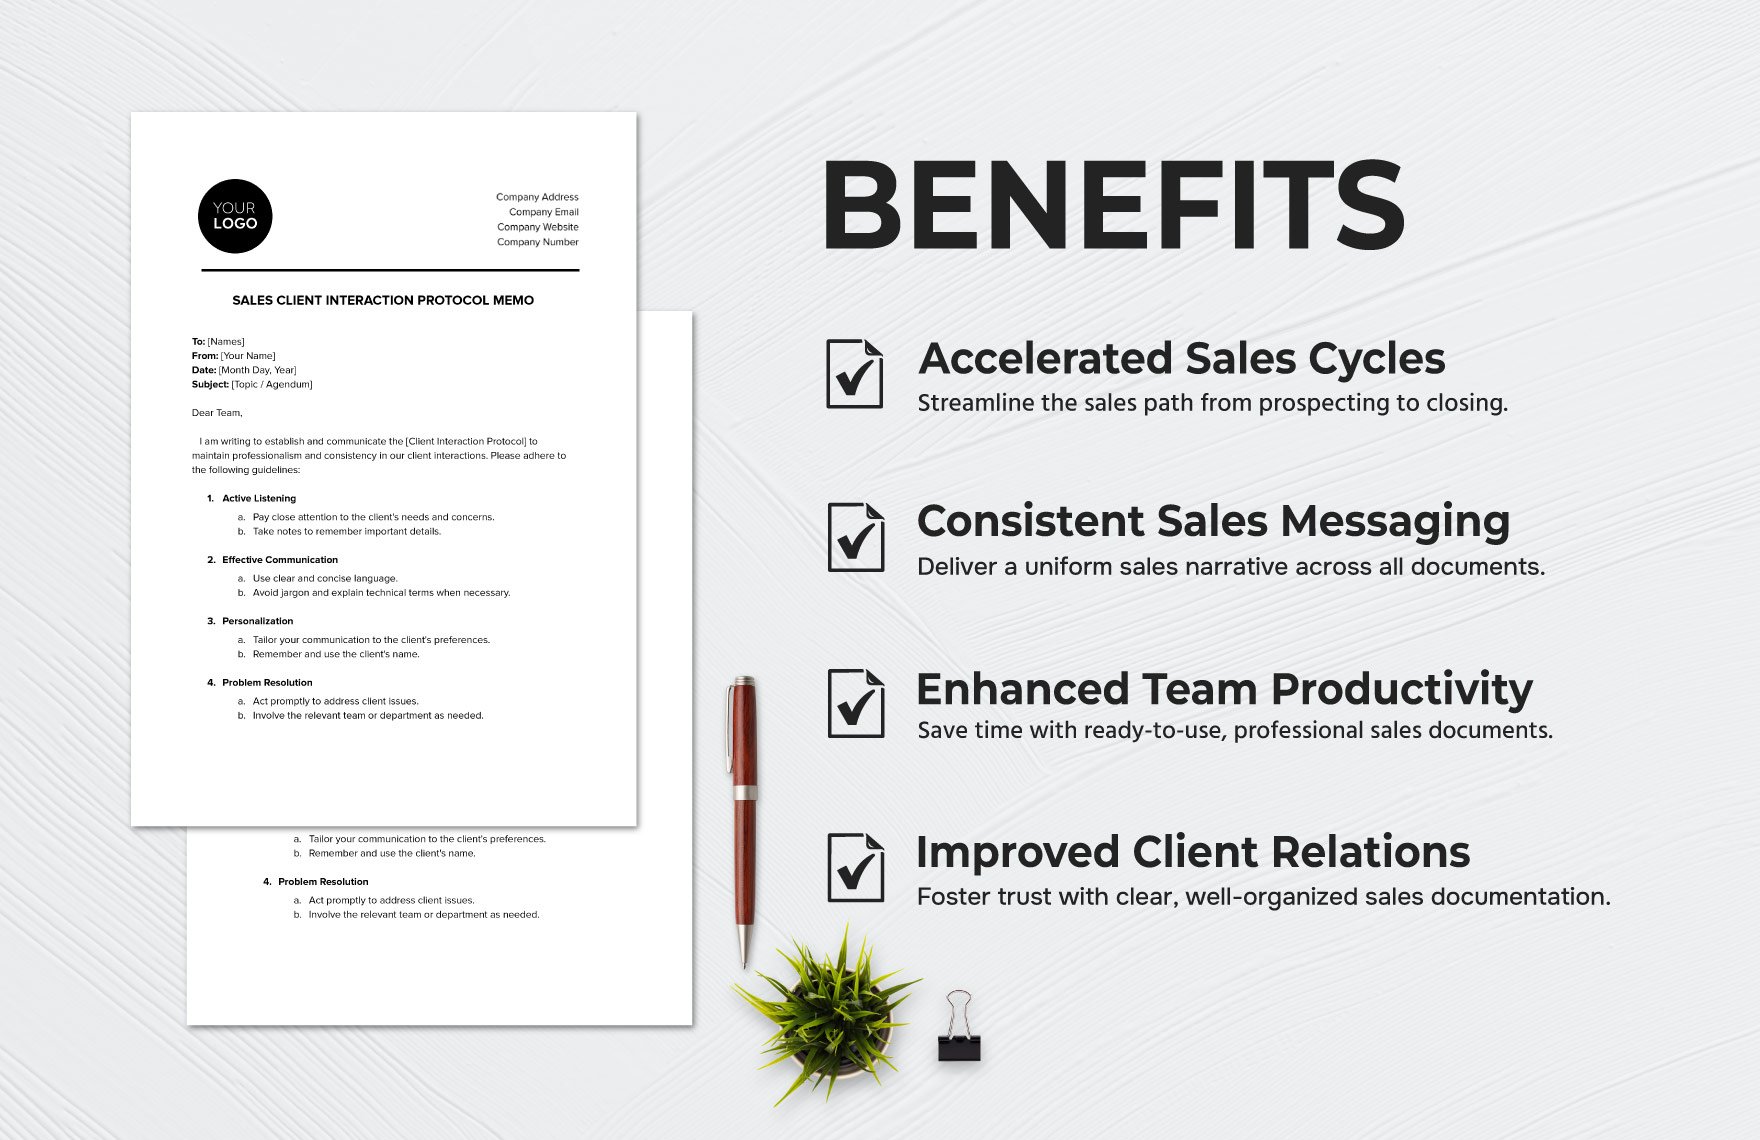 Sales Client Interaction Protocol Memo Template